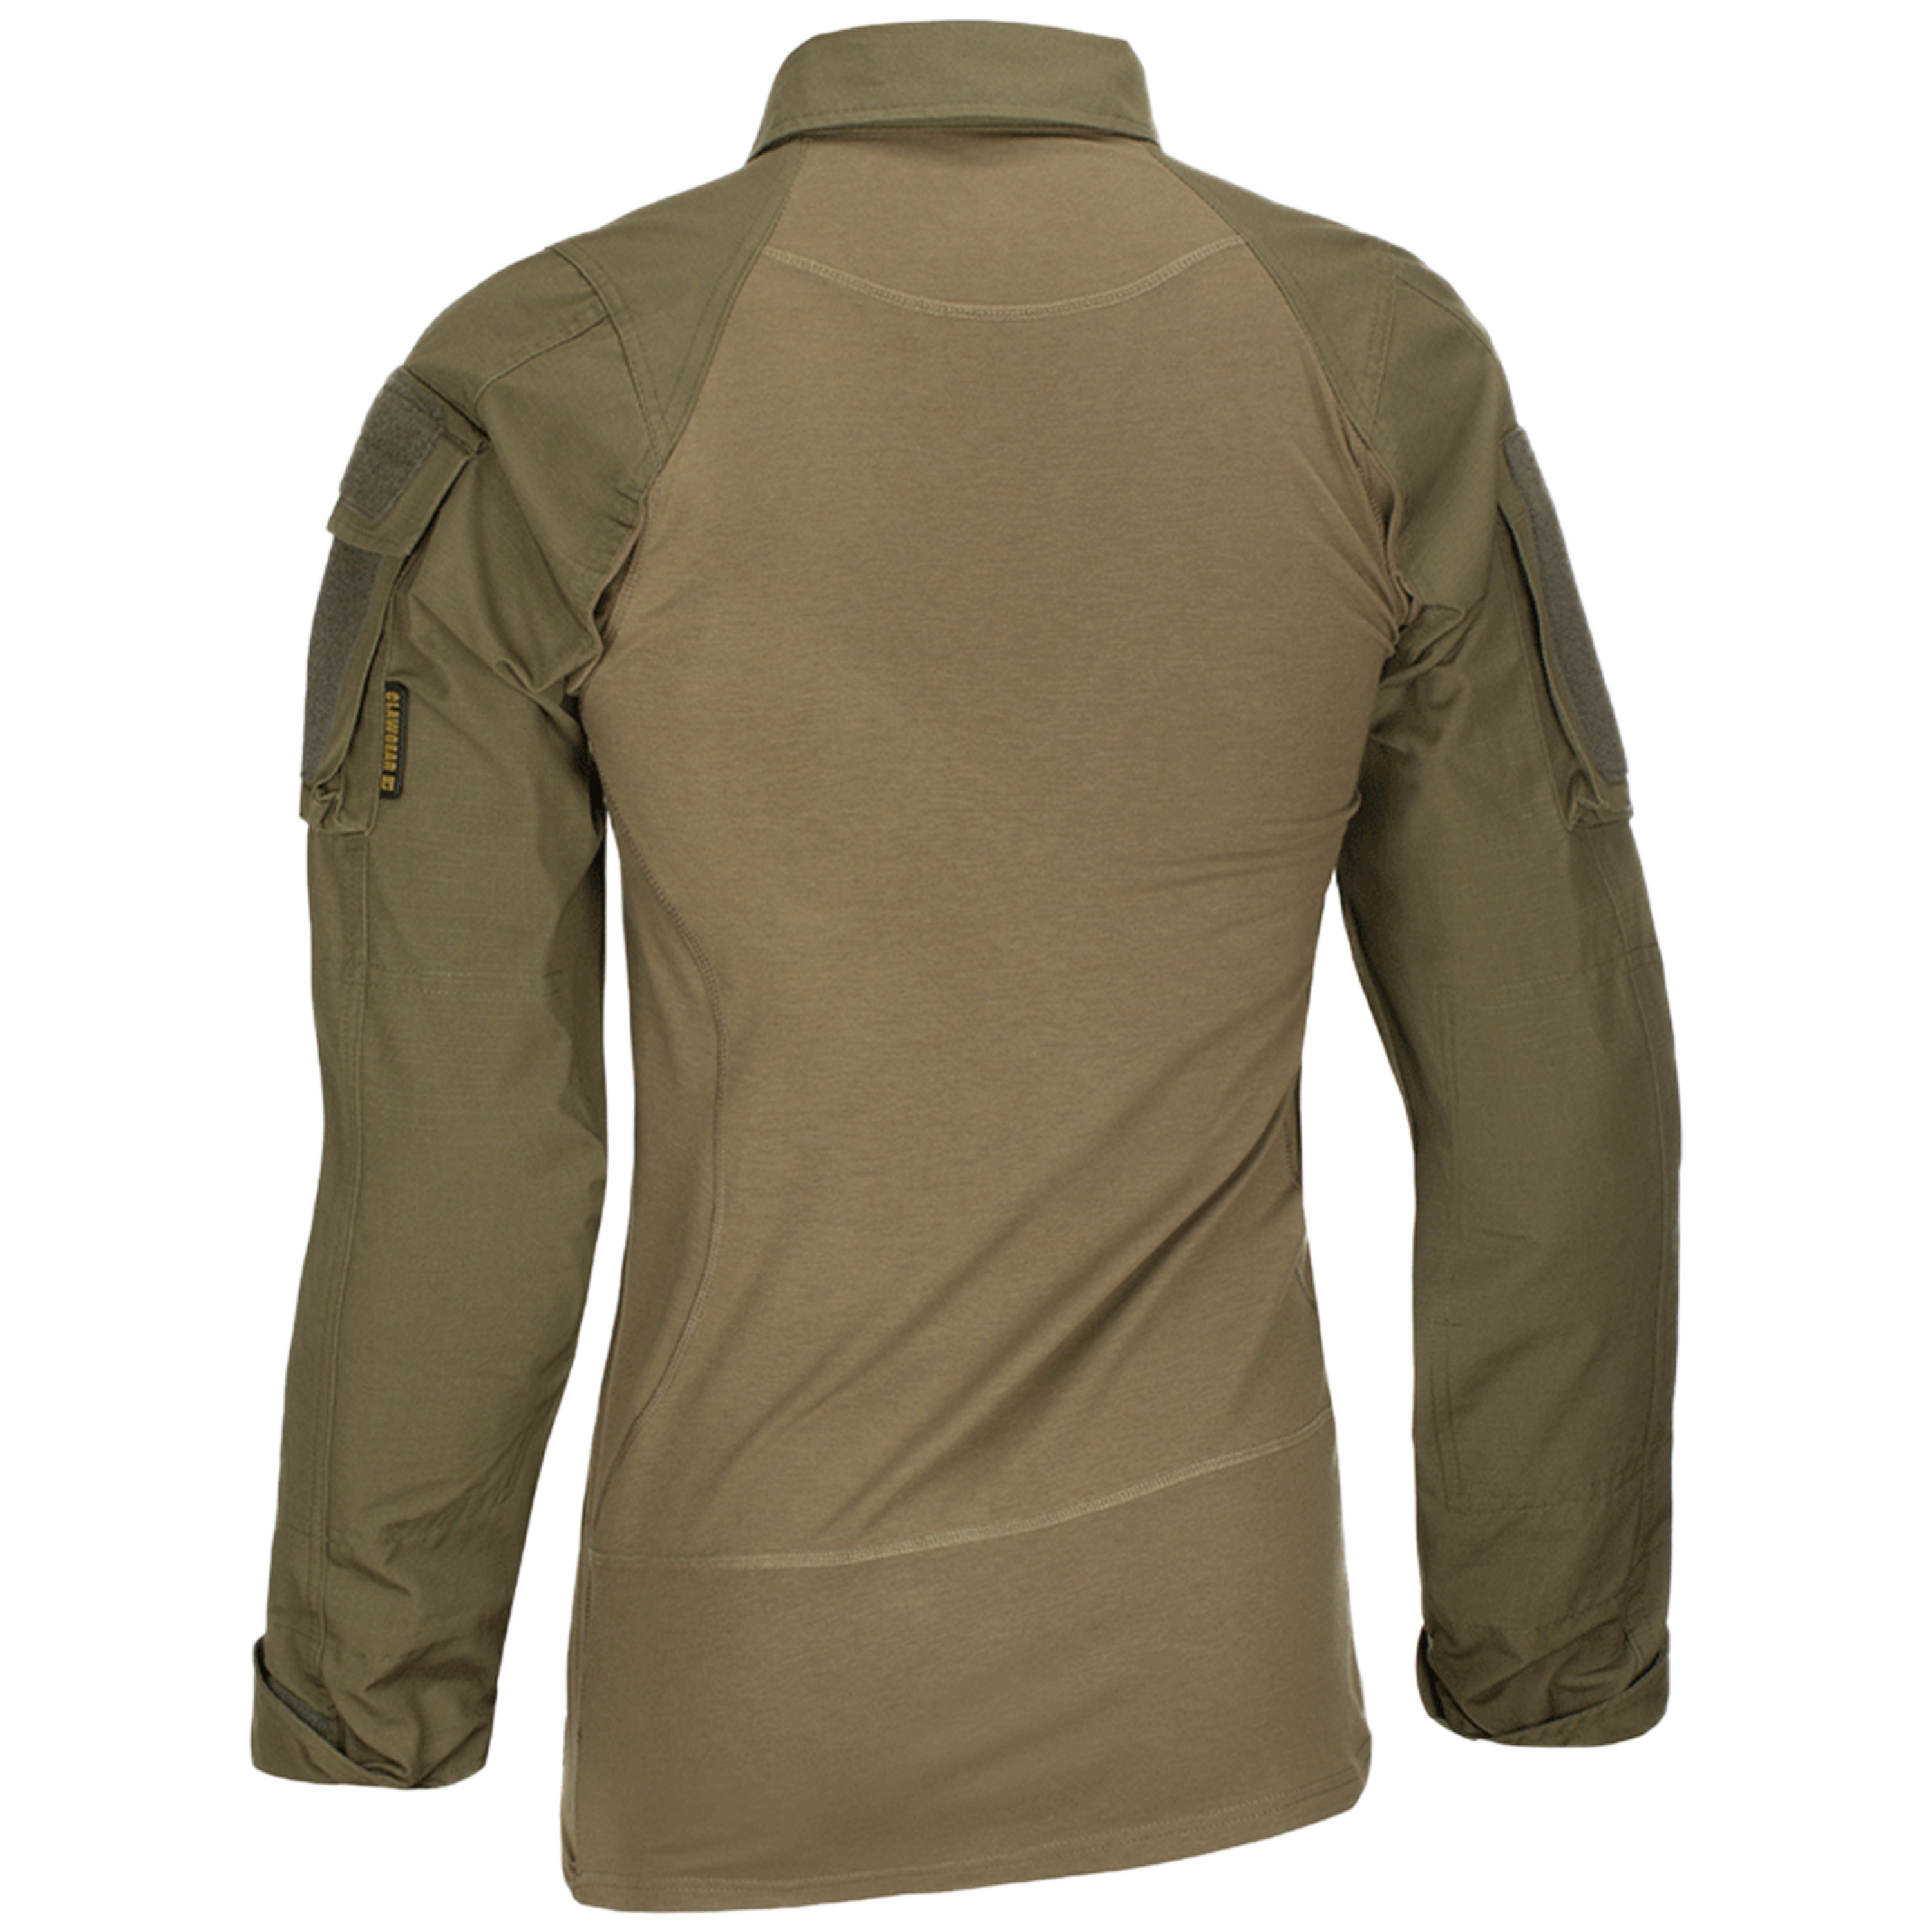 Purchase the Clawgear Combat Shirt MK III stone gray olive by AS